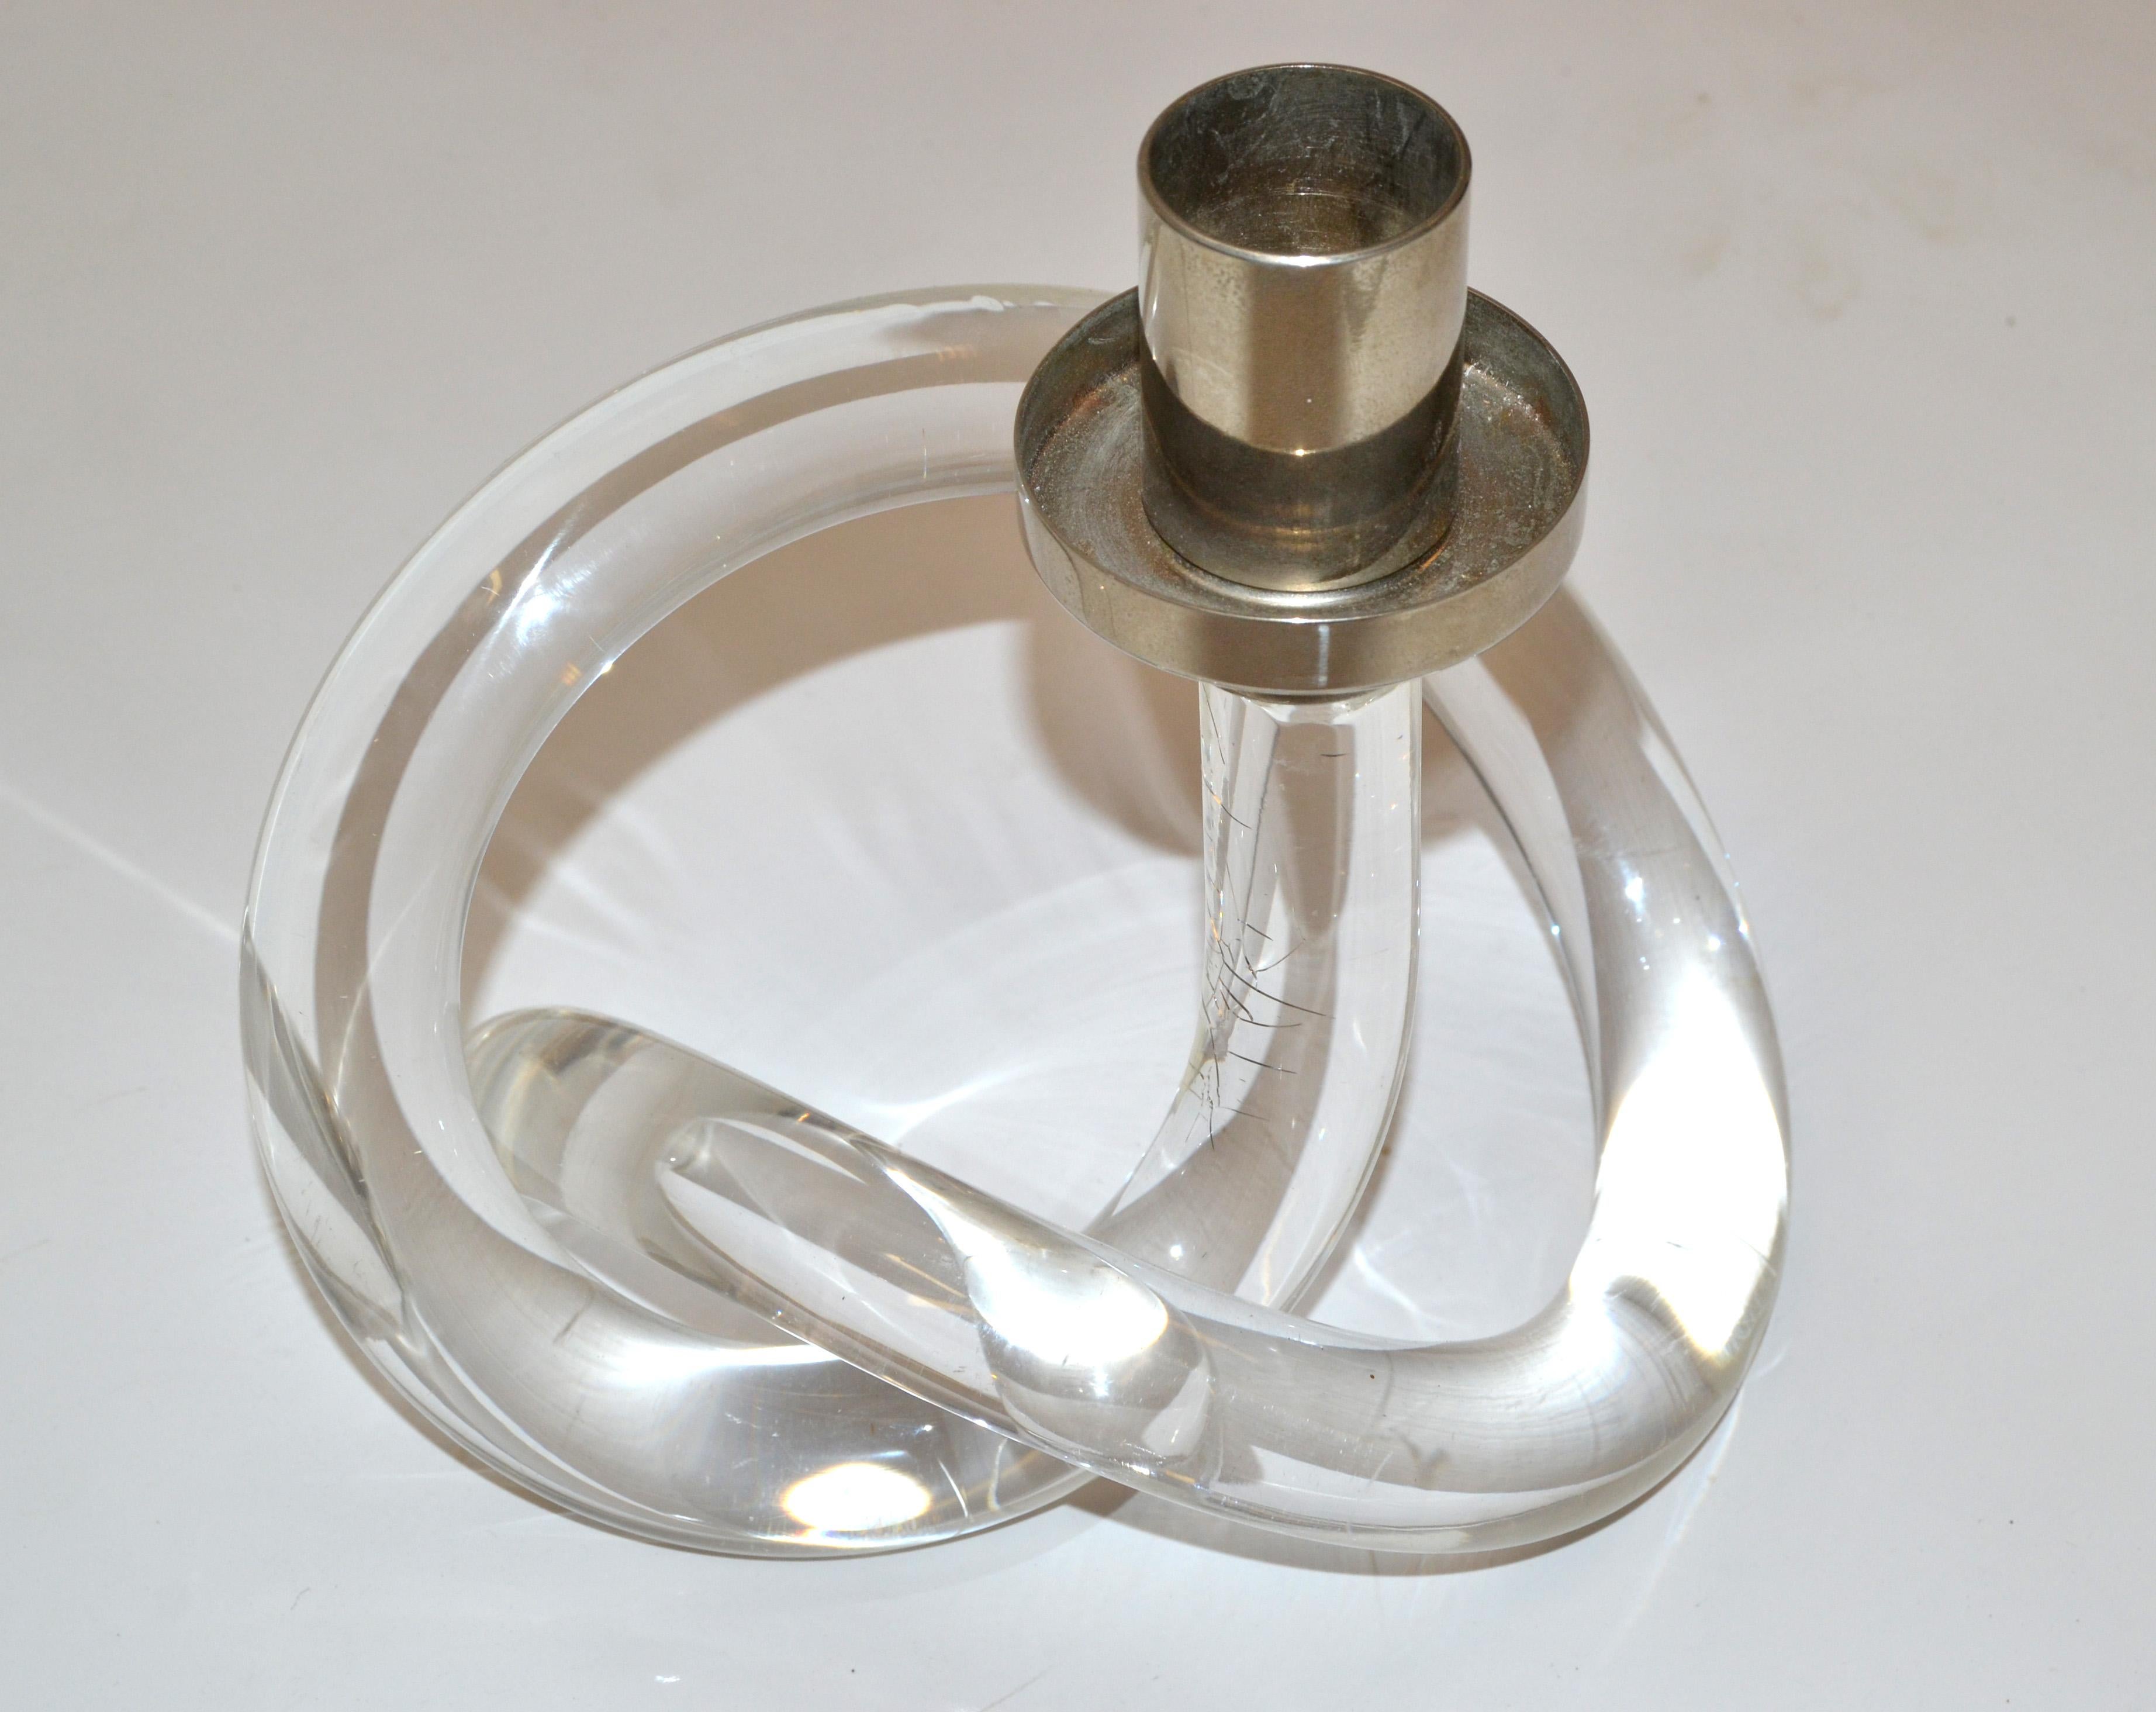 Late 20th Century Dorothy Thorpe Lucite and Nickel Candleholder in Pretzel Shape